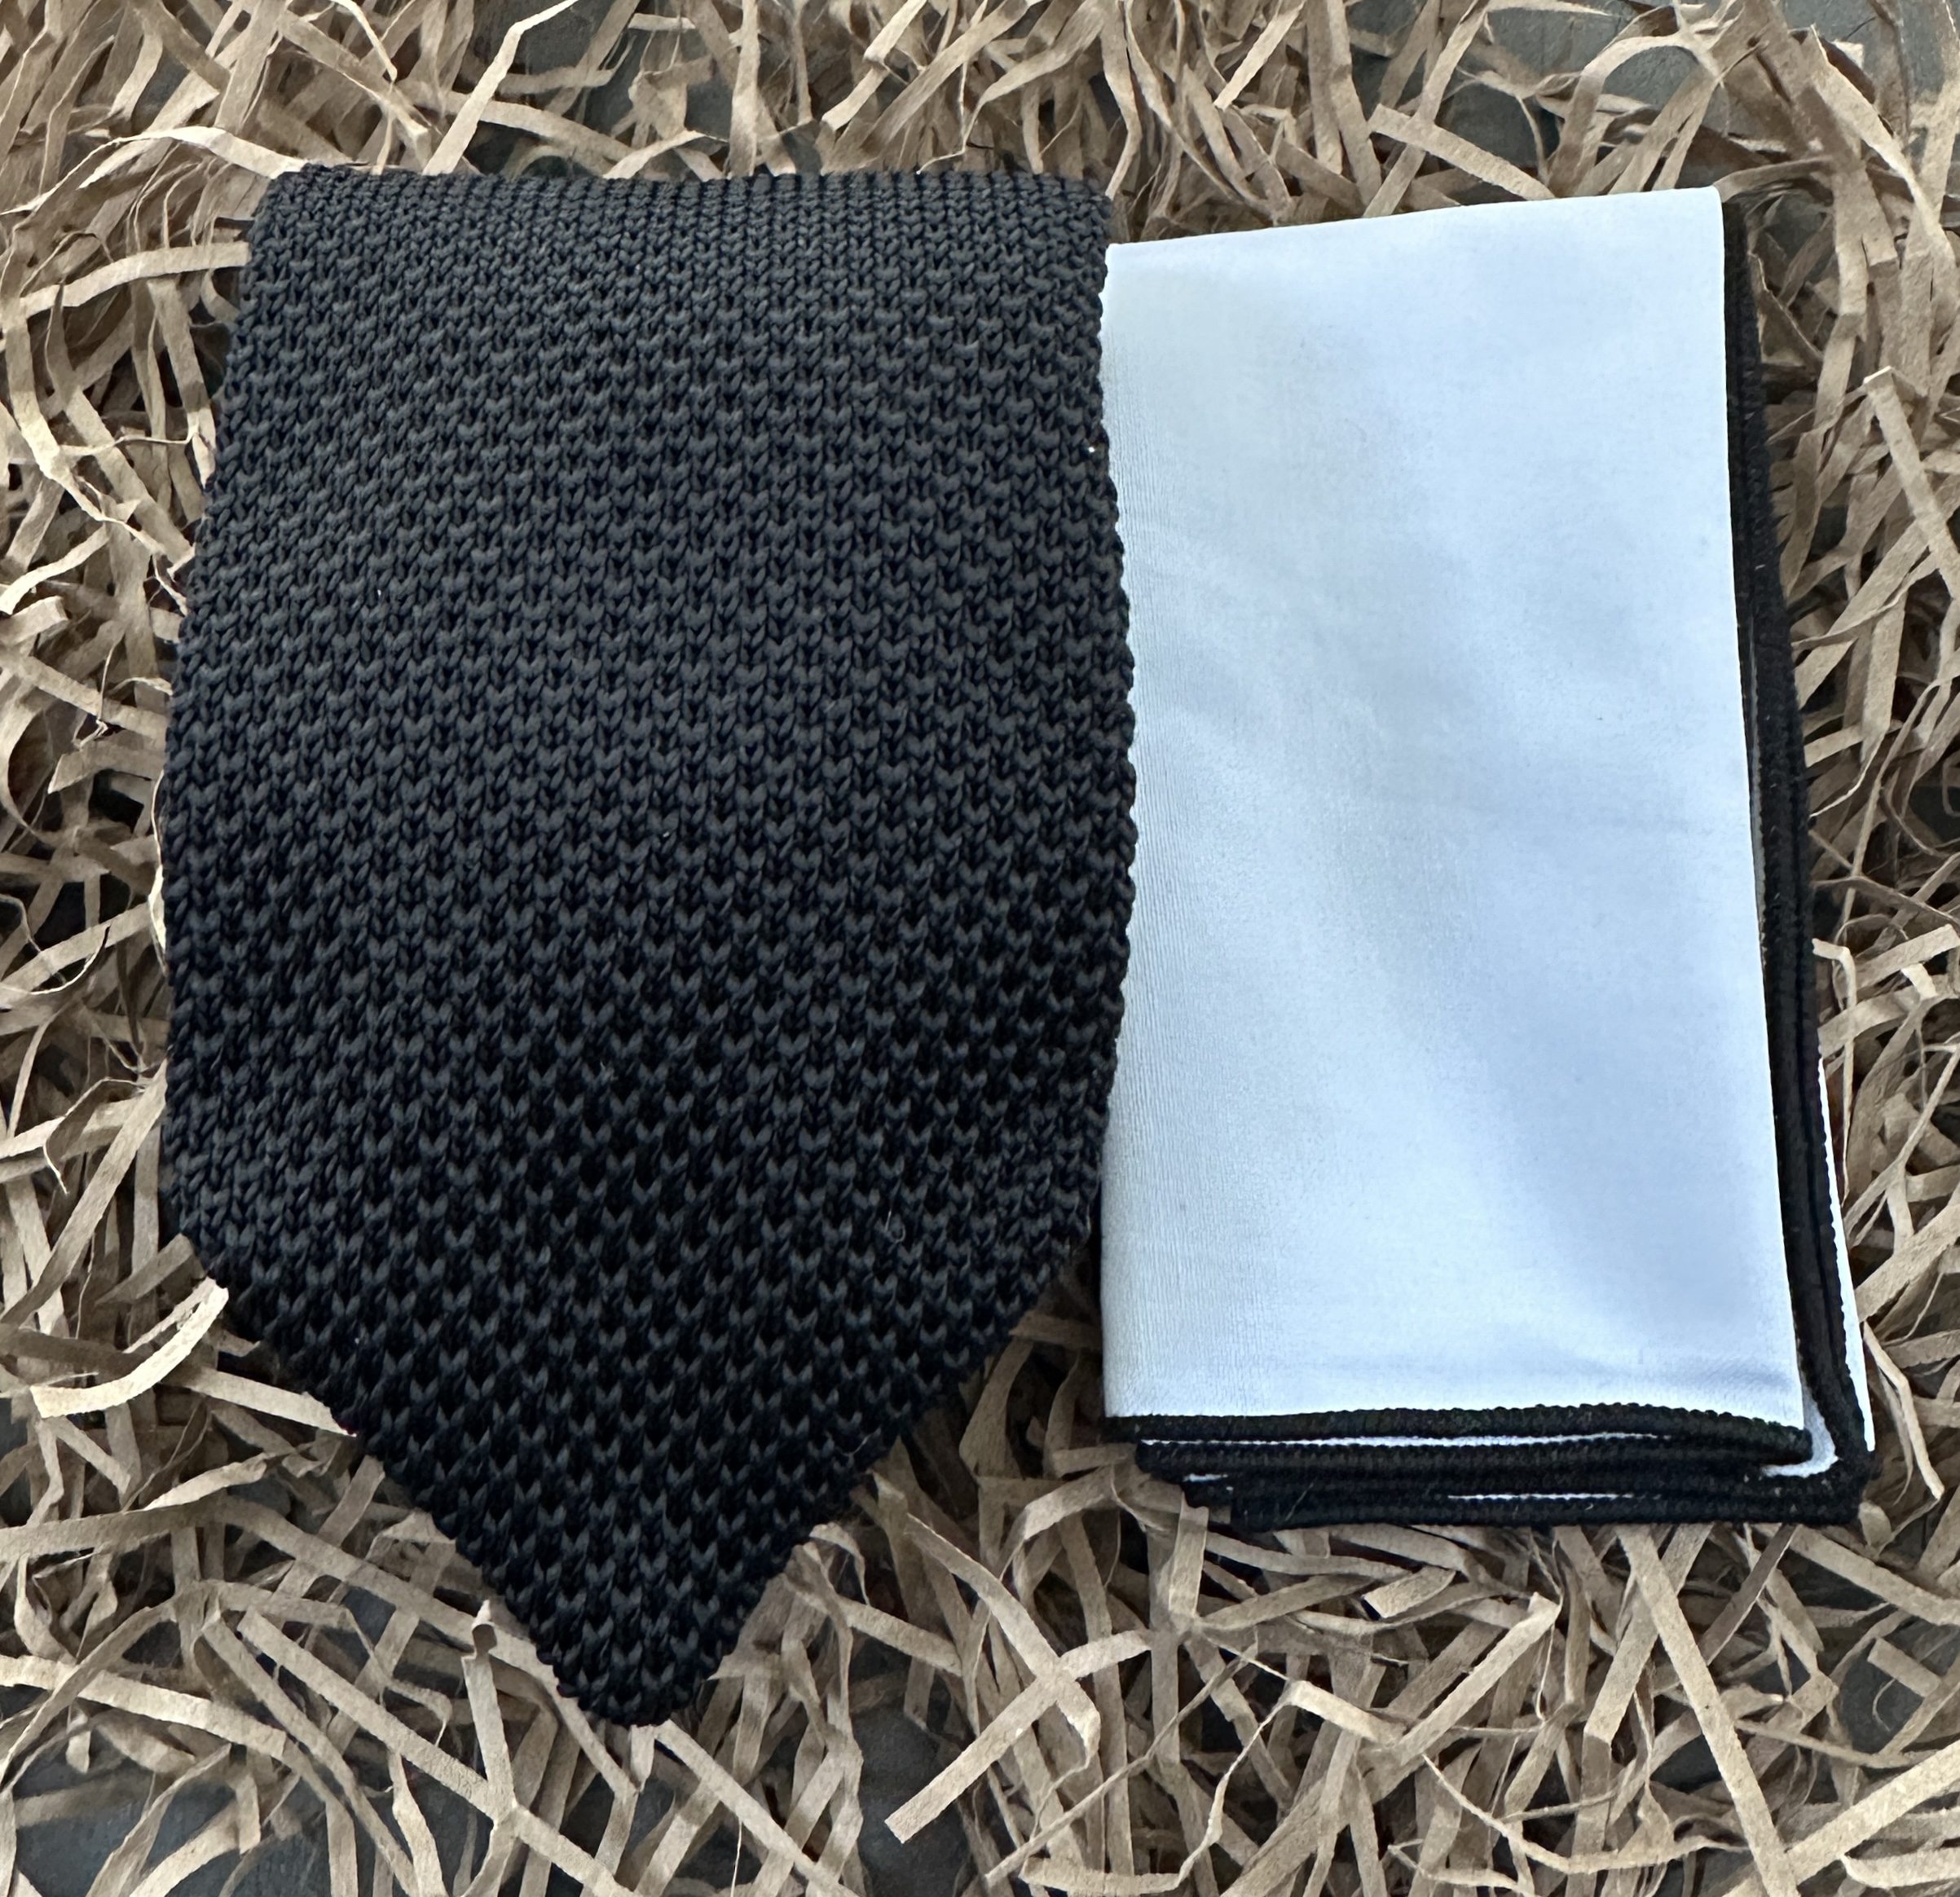 A fabulous men's knitted tie in black with a crisp white handkerchief with a black trim.